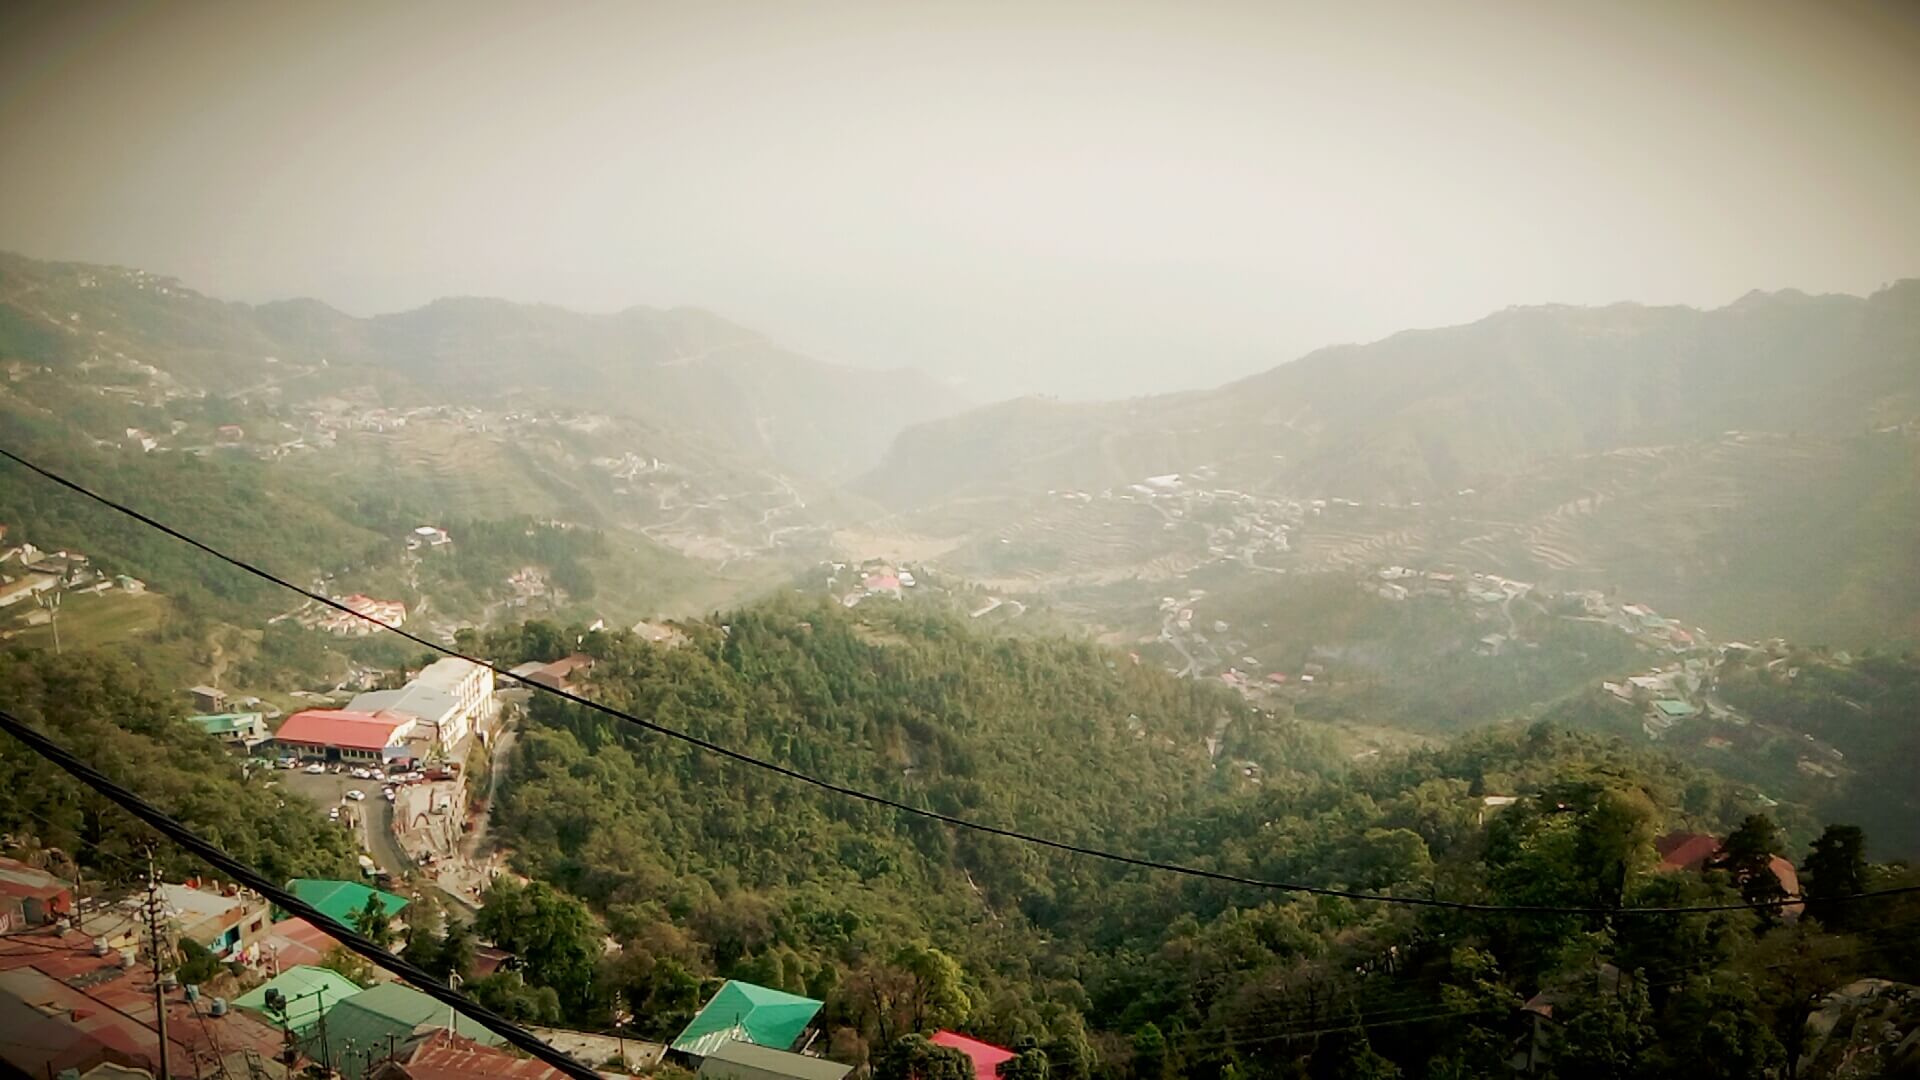 Landour - An Amazing Place To Experience